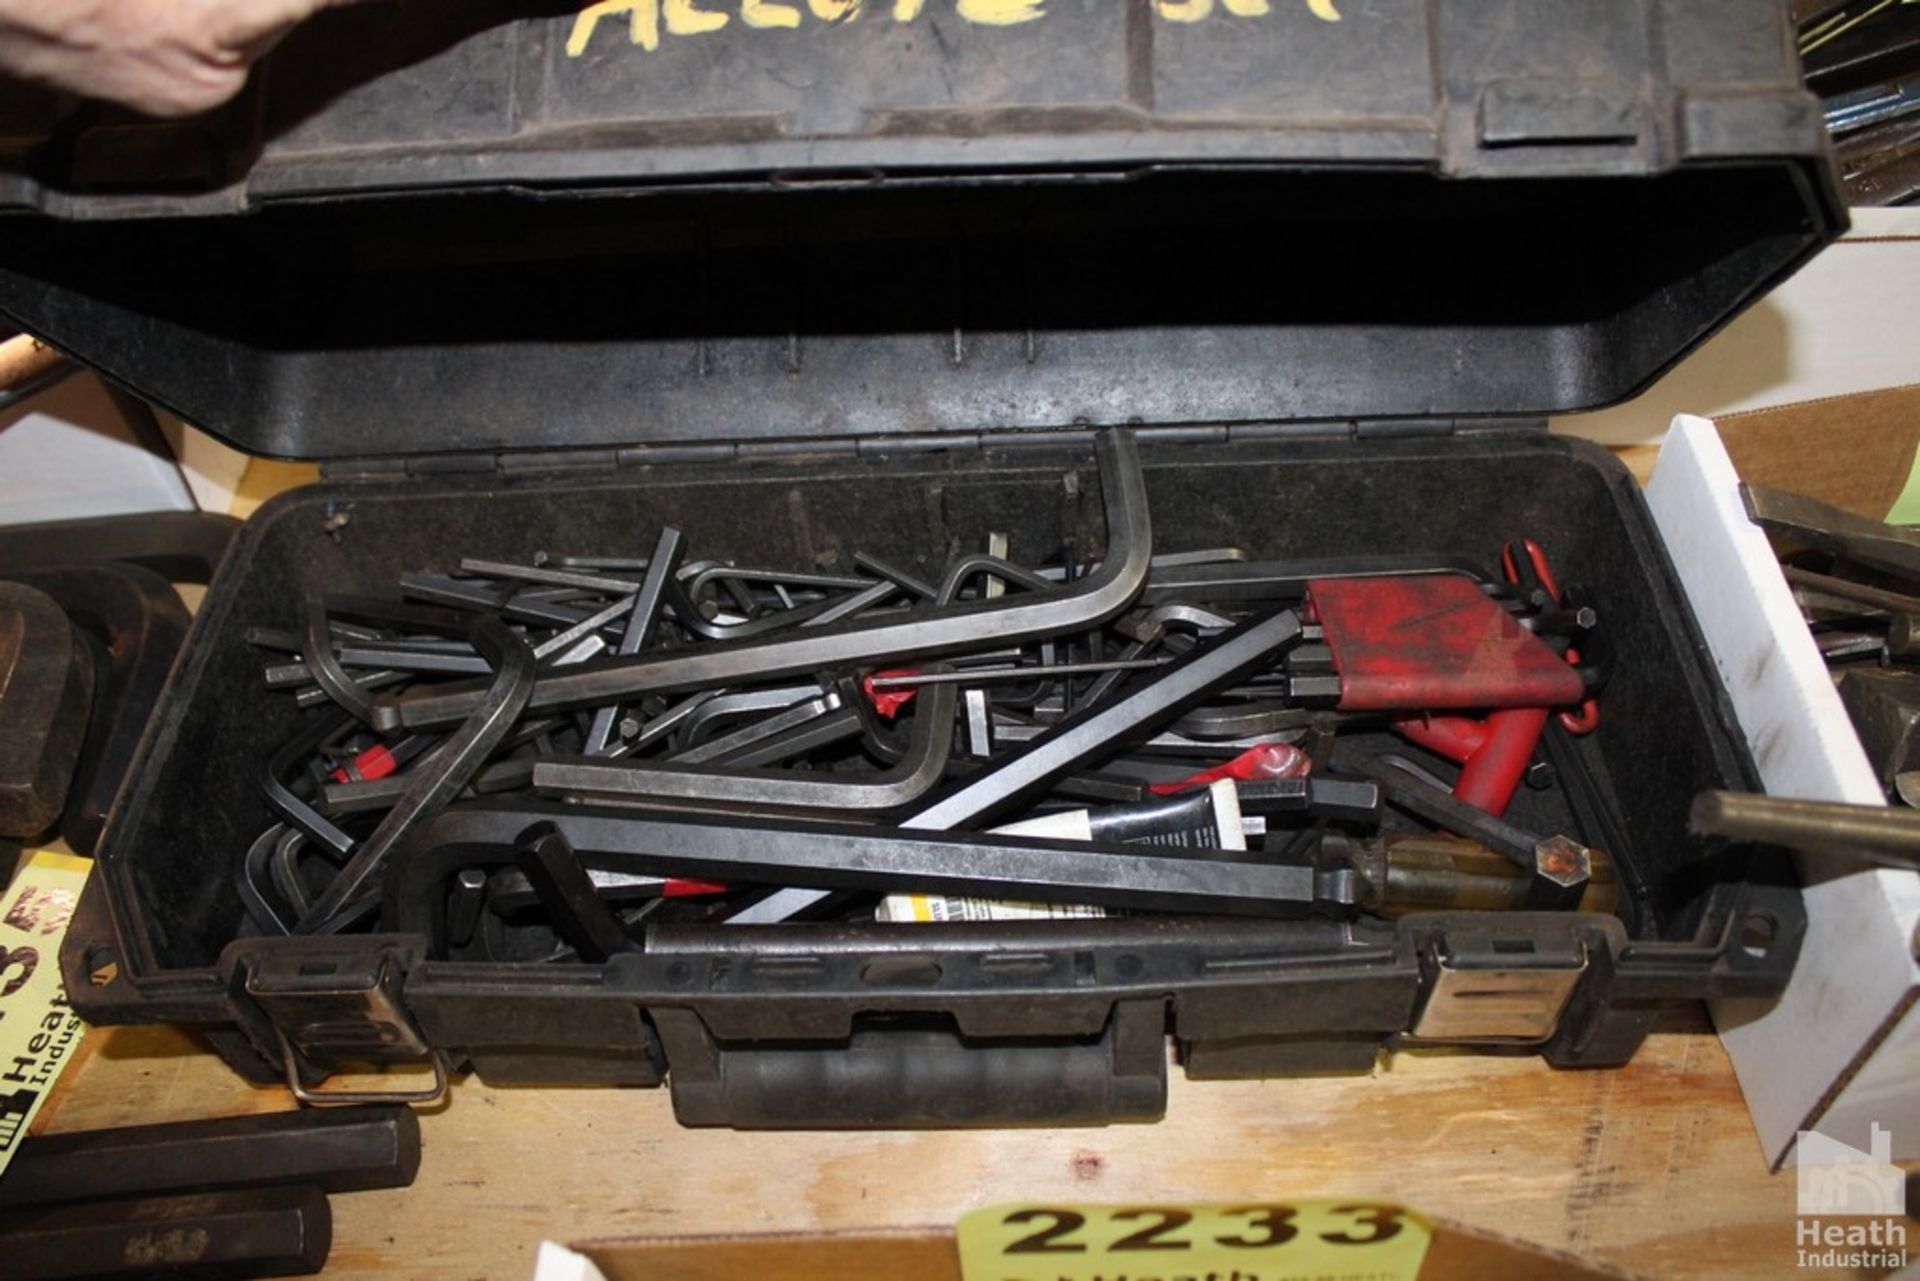 LARGE QTY ALLEN WRENCHES